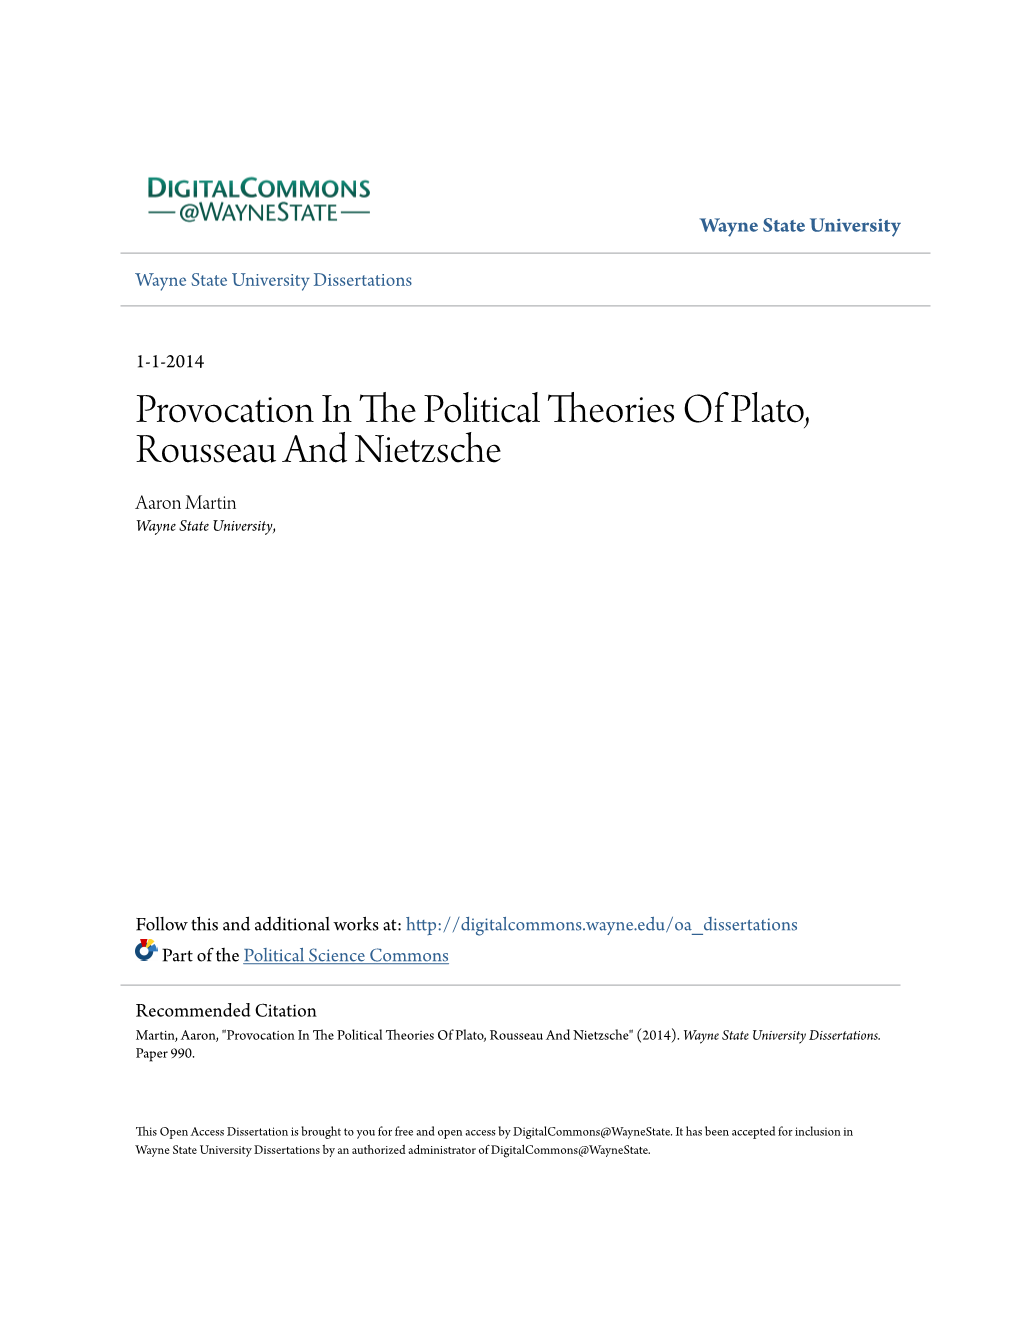 Provocation in the Political Theories of Plato, Rousseau and Nietzsche